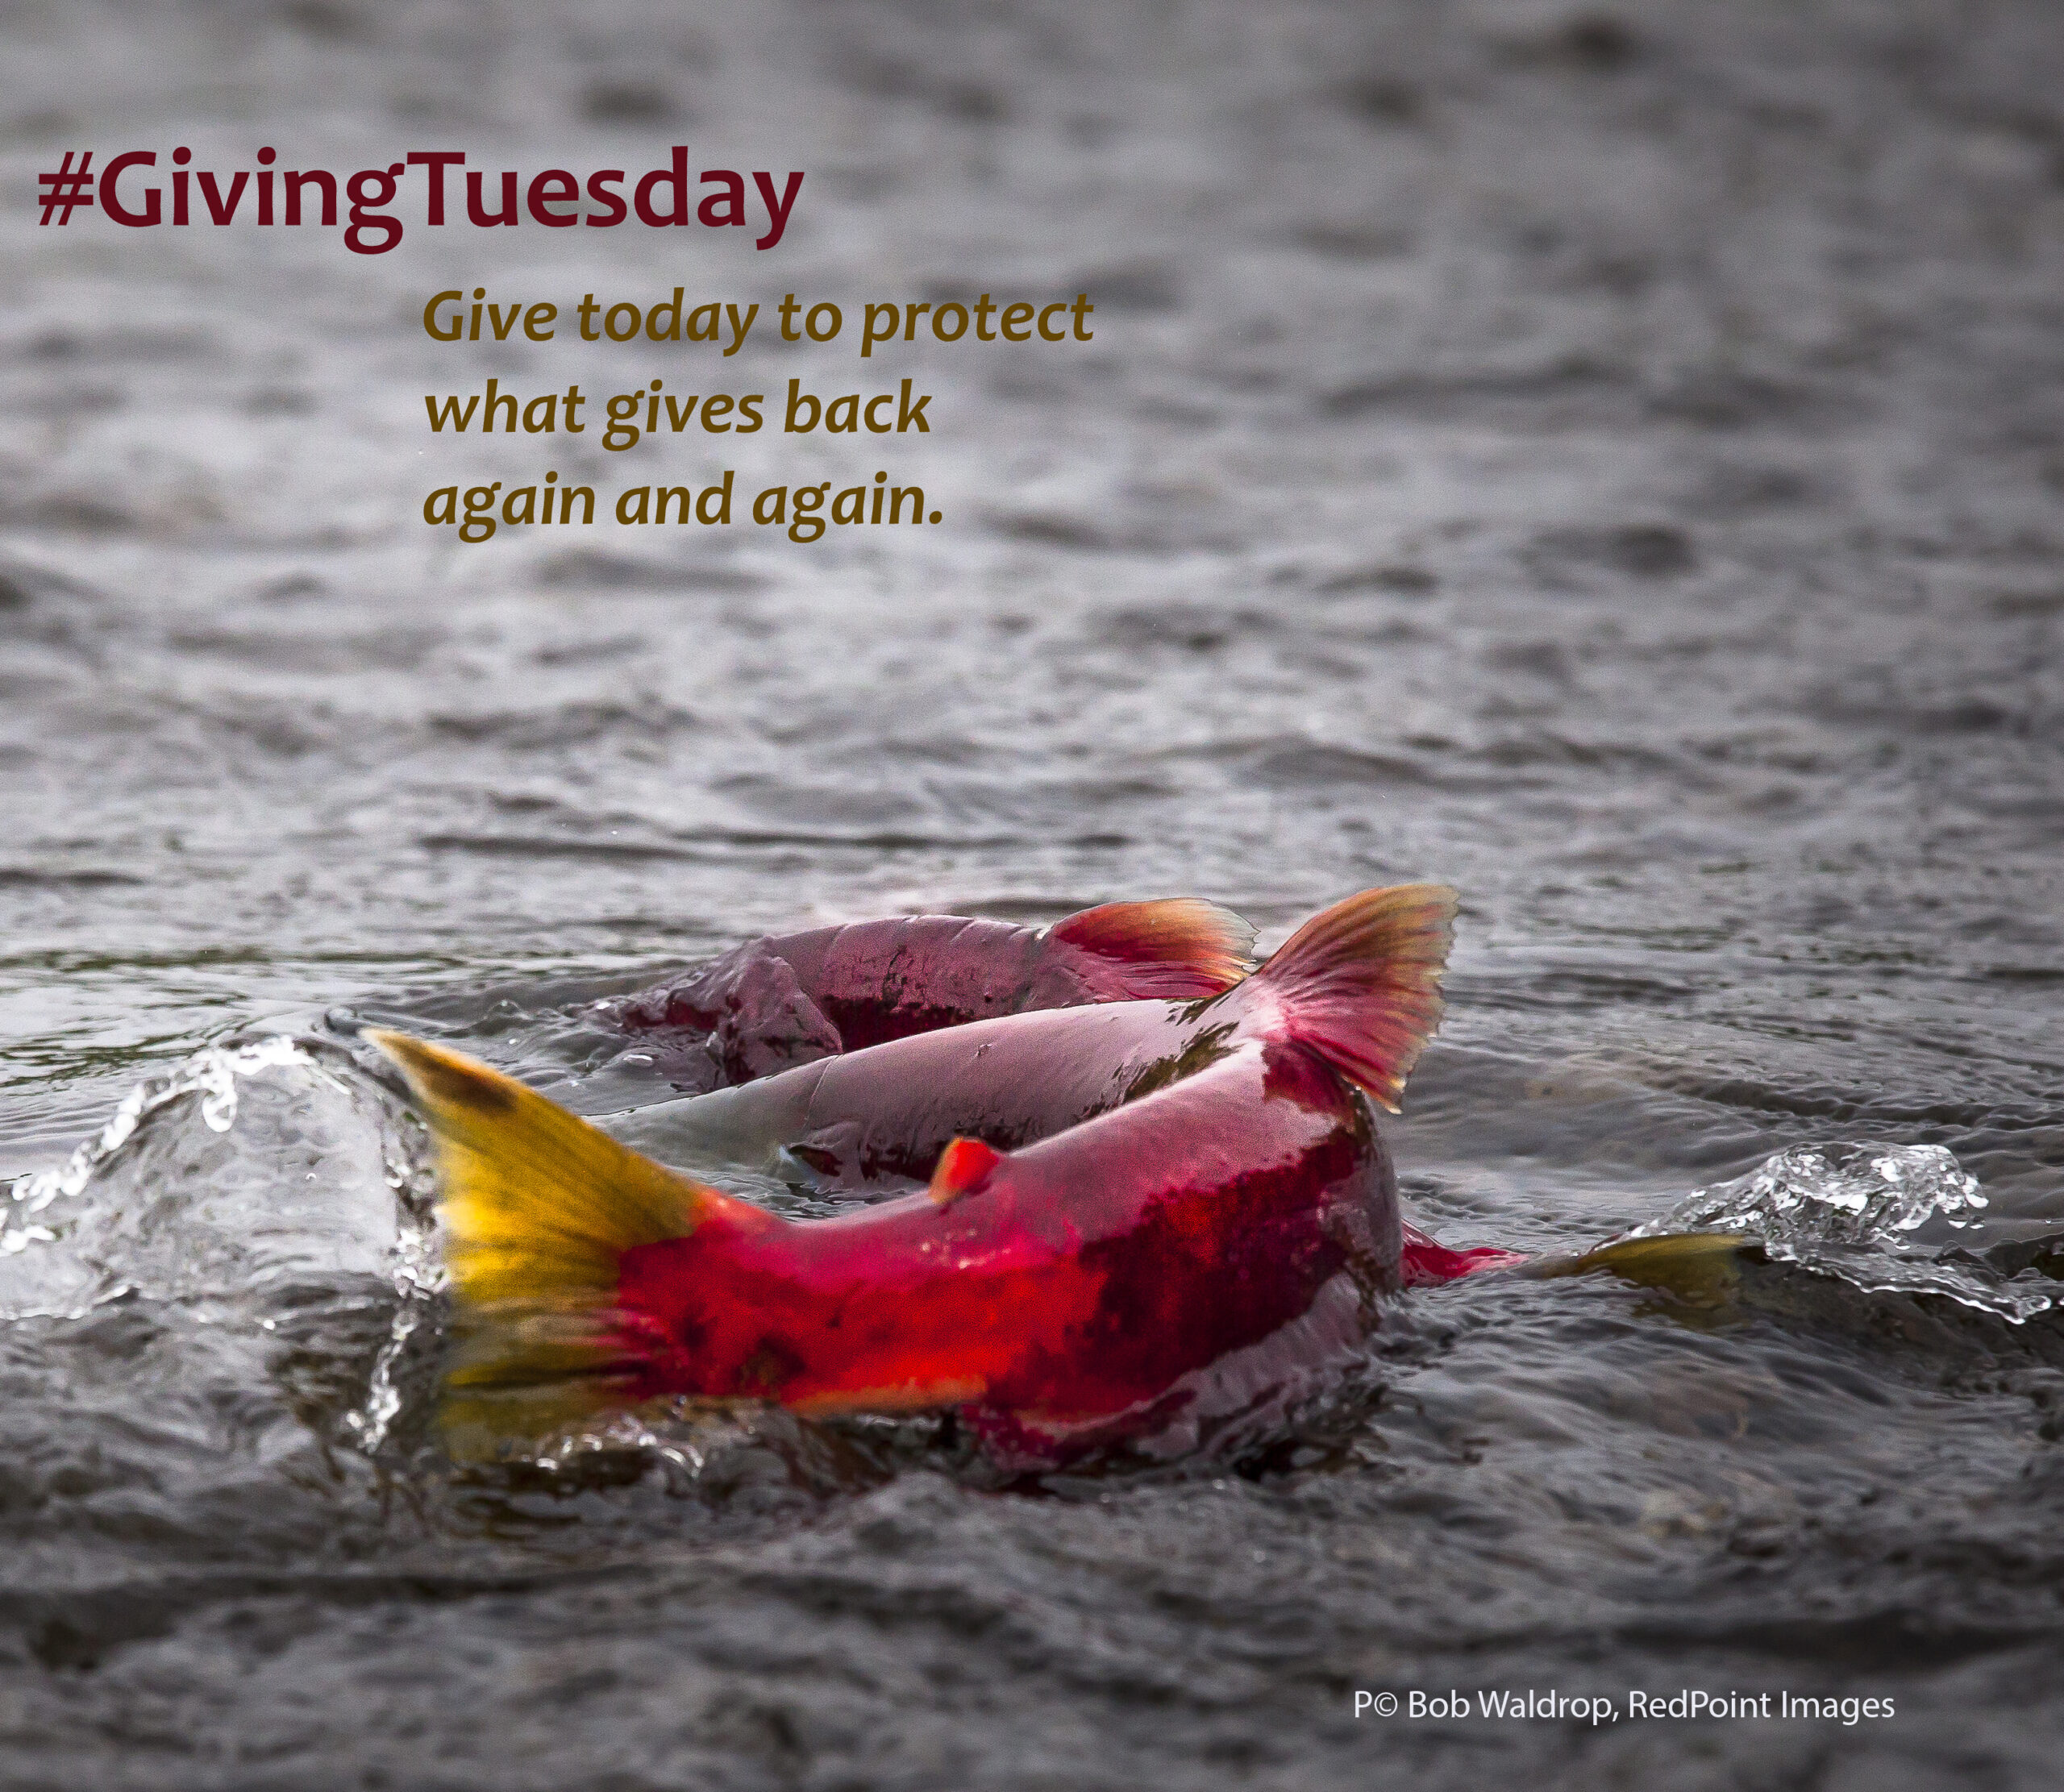 Join in on #givingTuesday to protect the wild